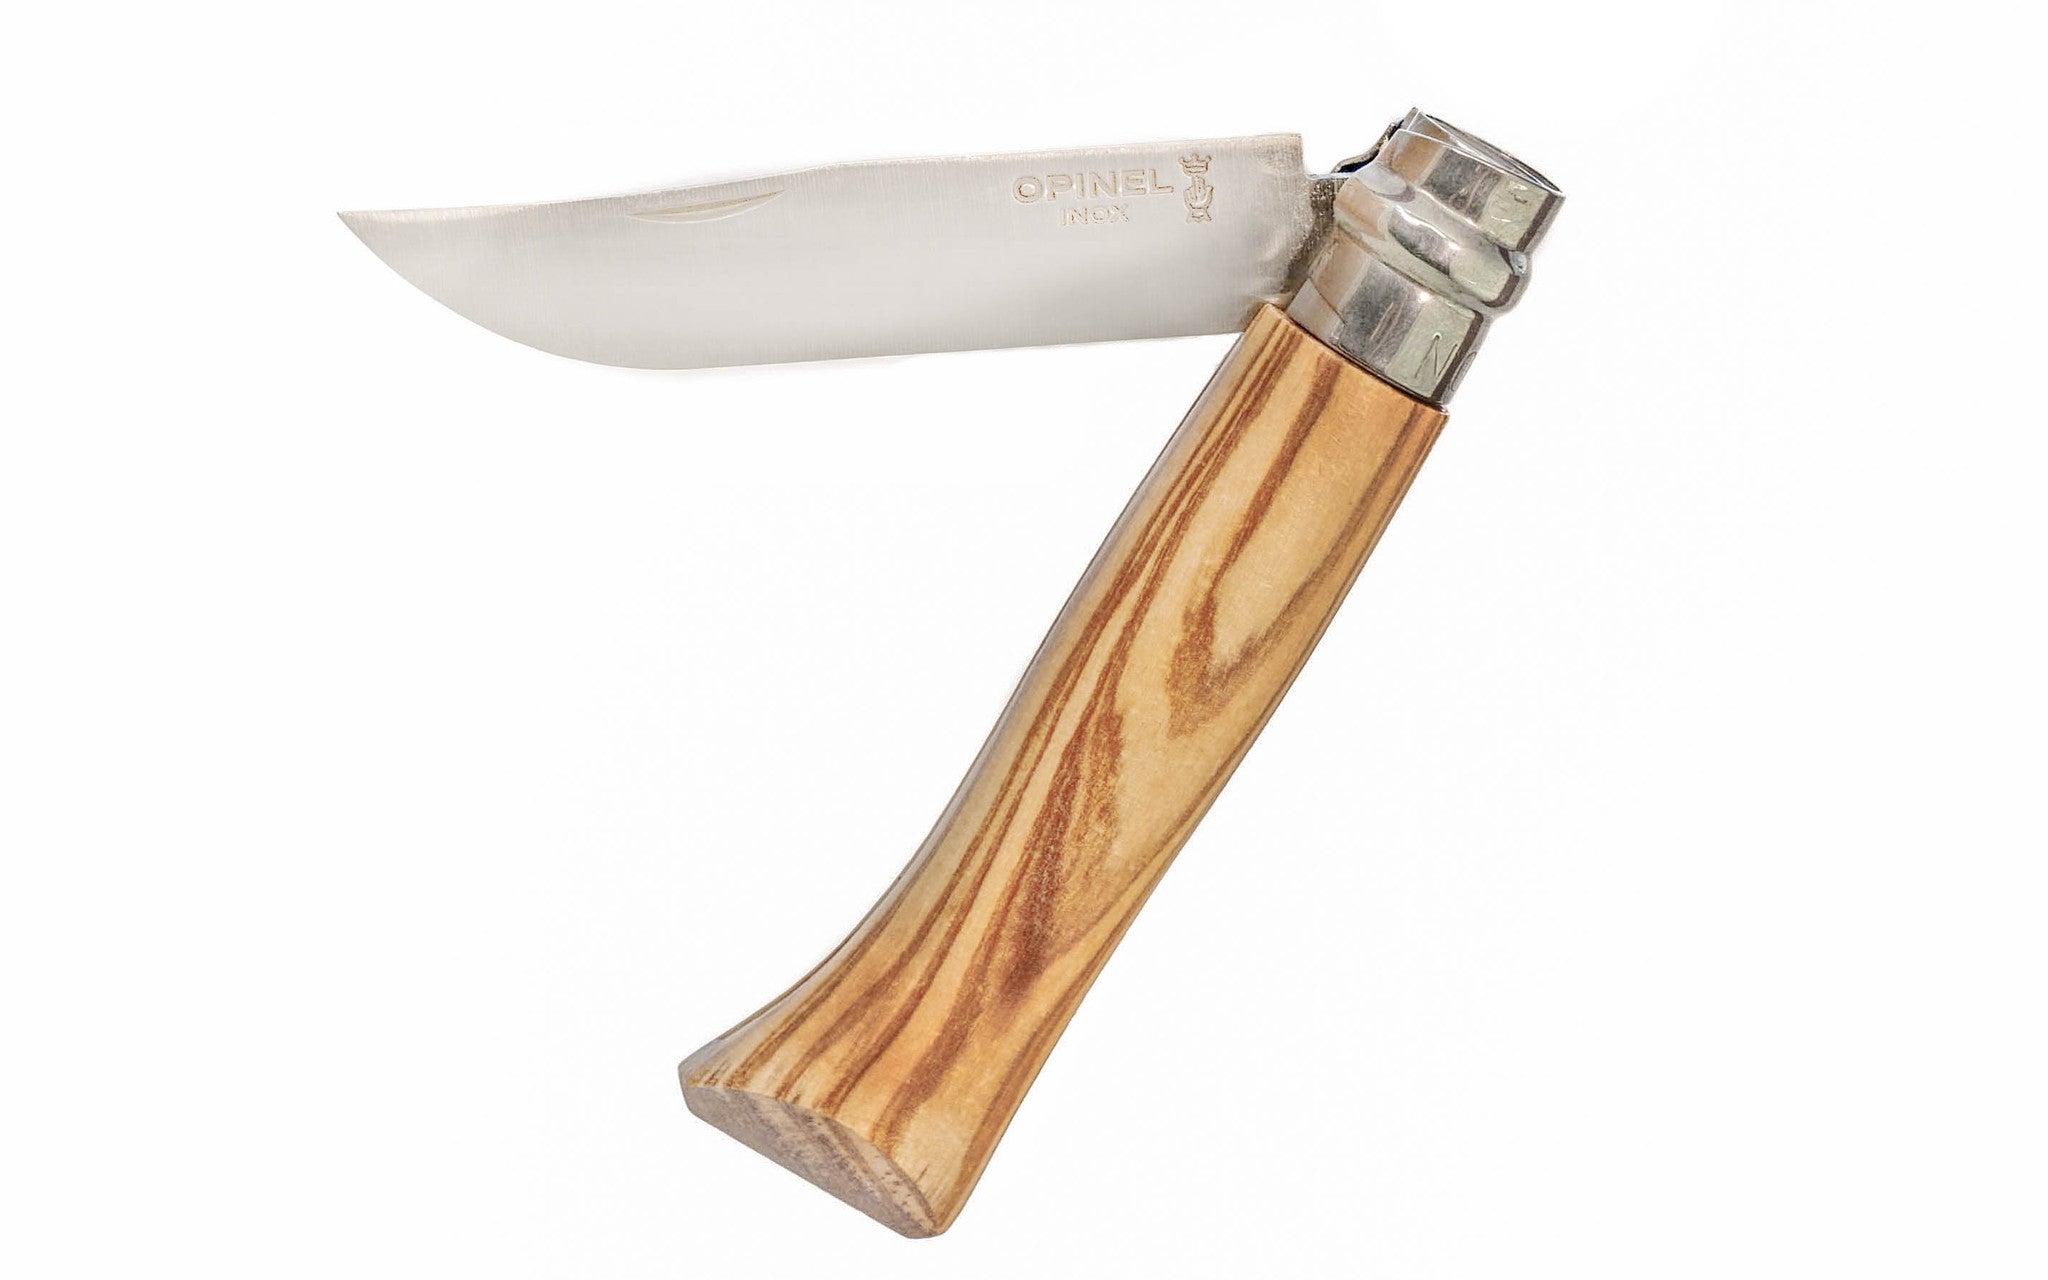 opinel knife Traditional stainless steel blade handle 9cm olive